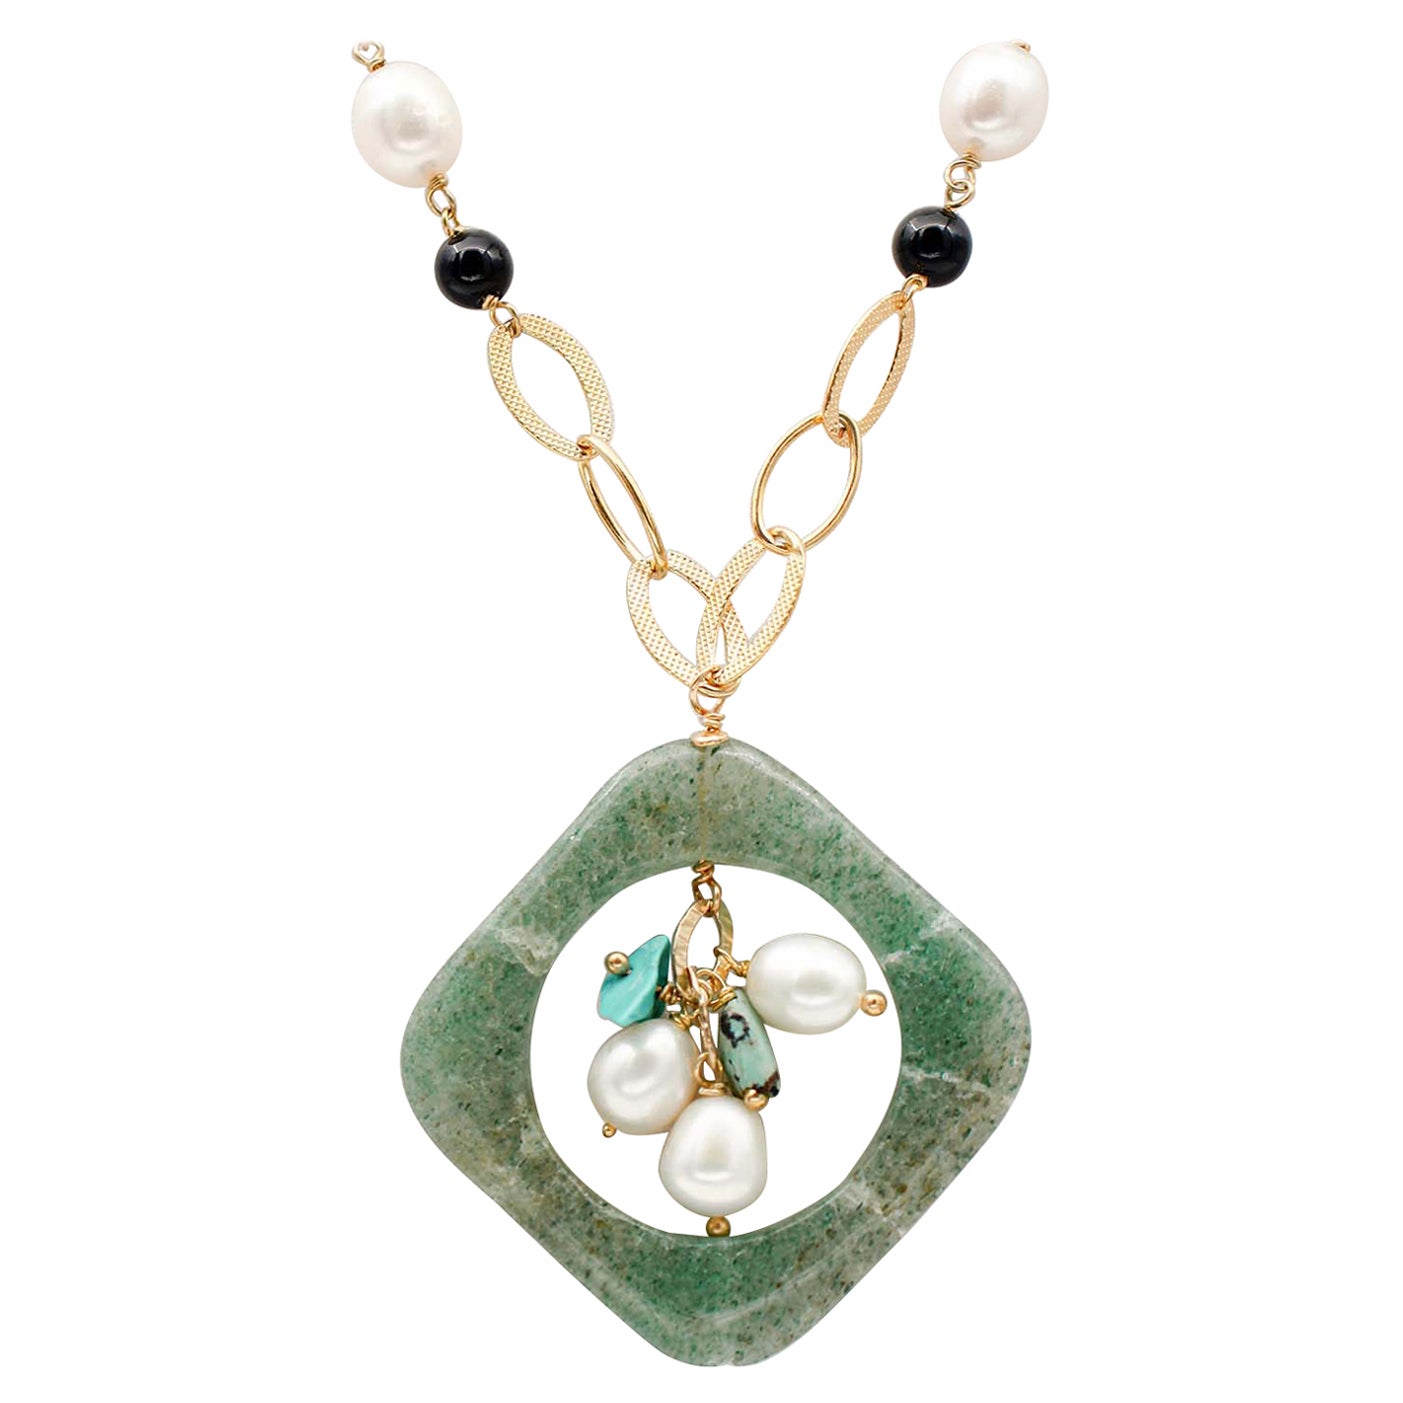 Pearls, Onyx, Turquoise, Green Stone, Pendant Necklace For Sale